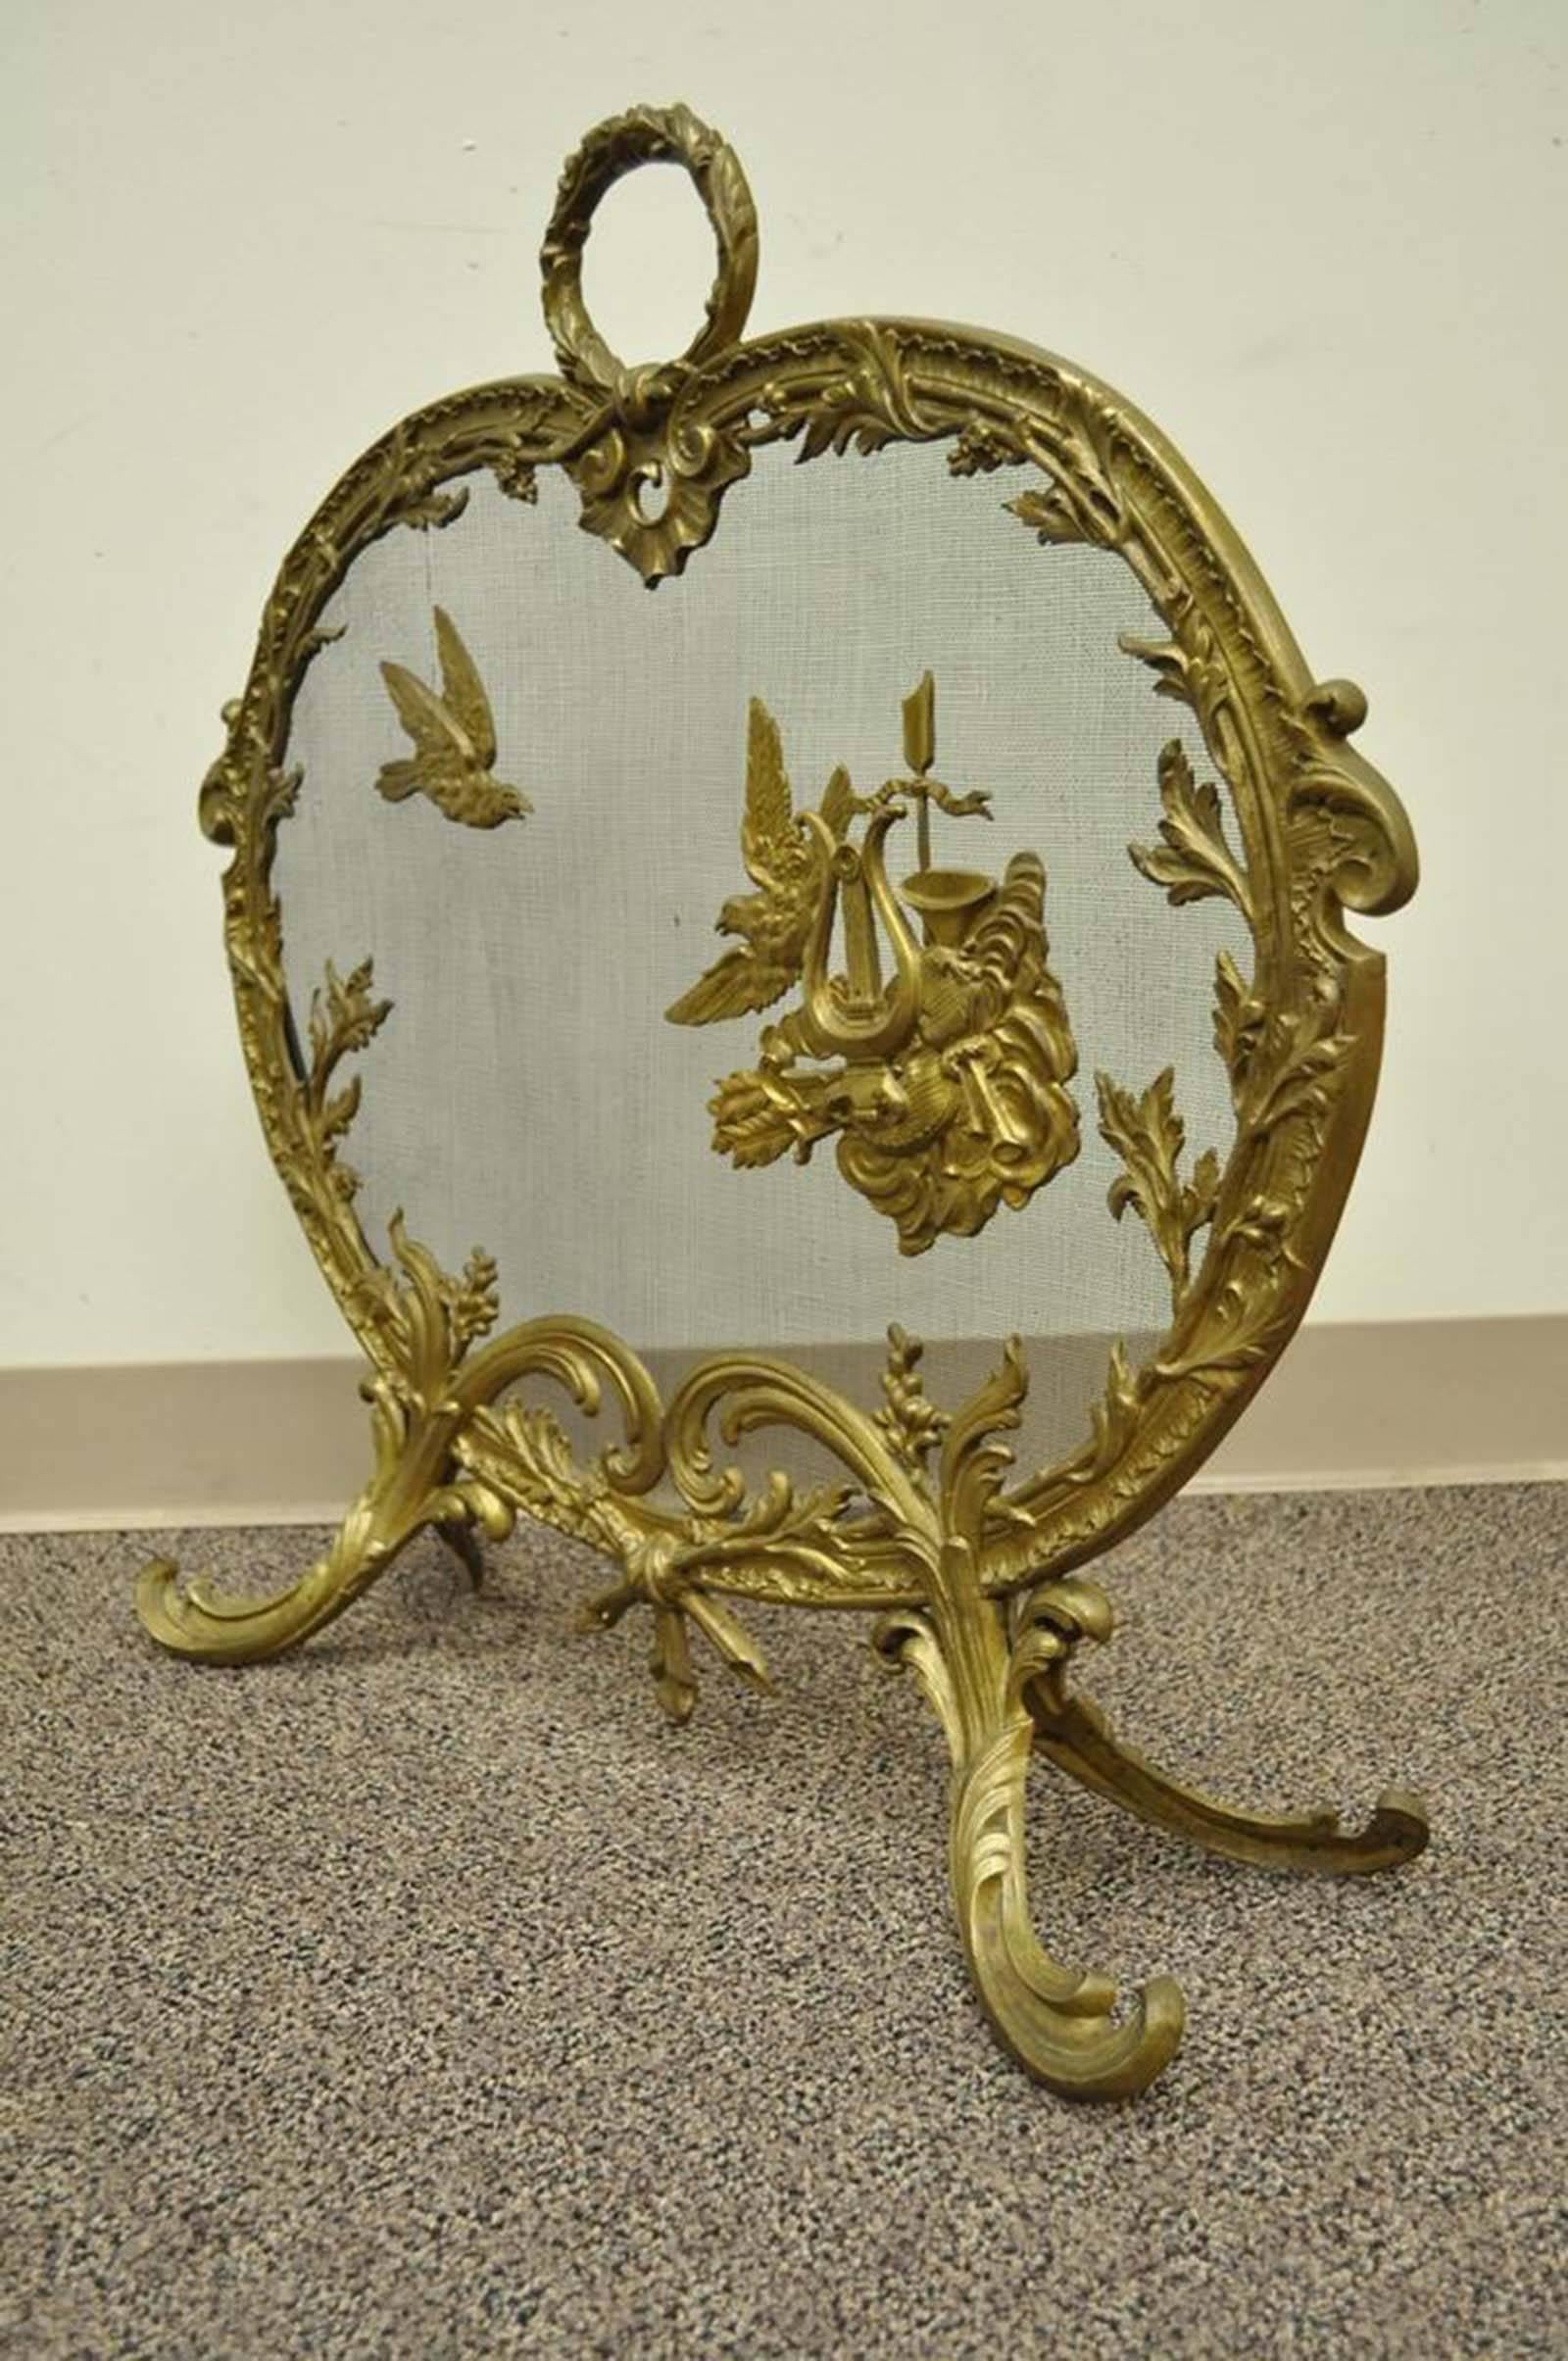 Gorgeous antique French Rococo/Louis XV style cast bronze fireplace screen. The screen is very ornate, with floral and scroll work borders, scrolled feet, wreath form handle, and two suspended birds, one of which is carrying several musical